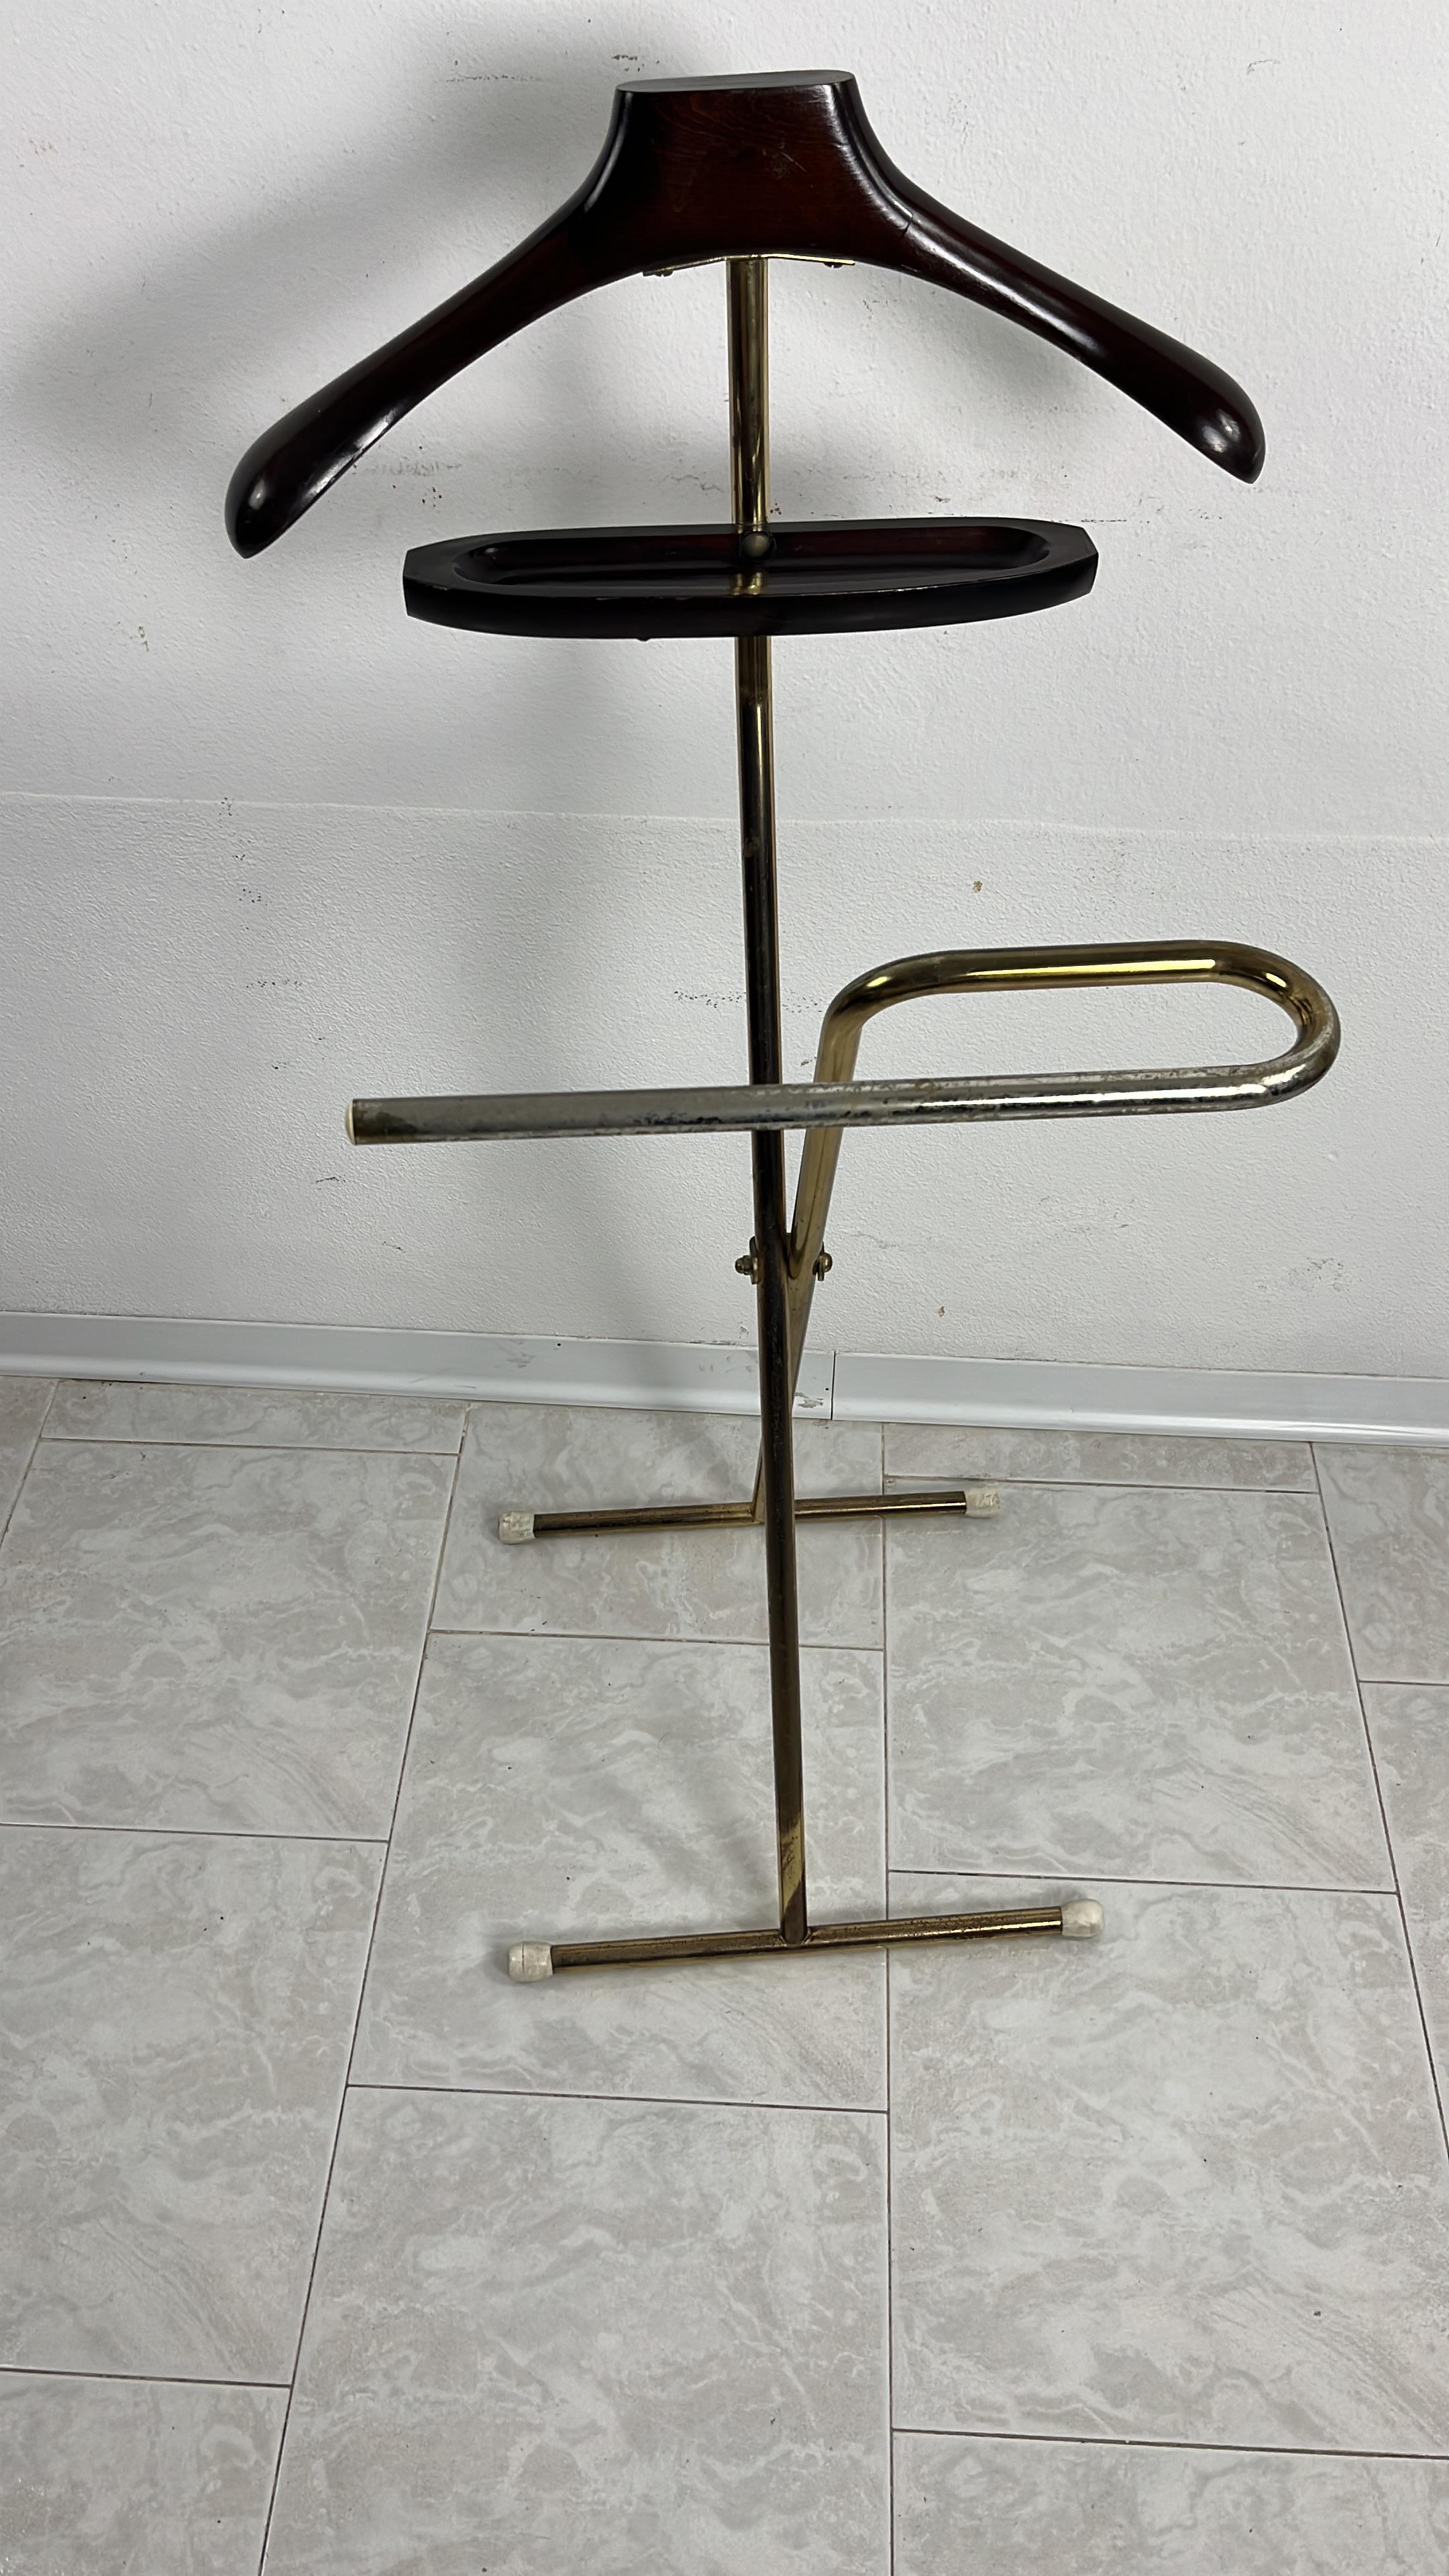 Folding valet stand attributed to Ico Parisi  Mid-century beech and gilt metal 1960s
Intact and in good condition, small defects on the gilding.
The depth varies from 35 cm when open to 10 cm when closed.

We guarantee adequate packaging and will